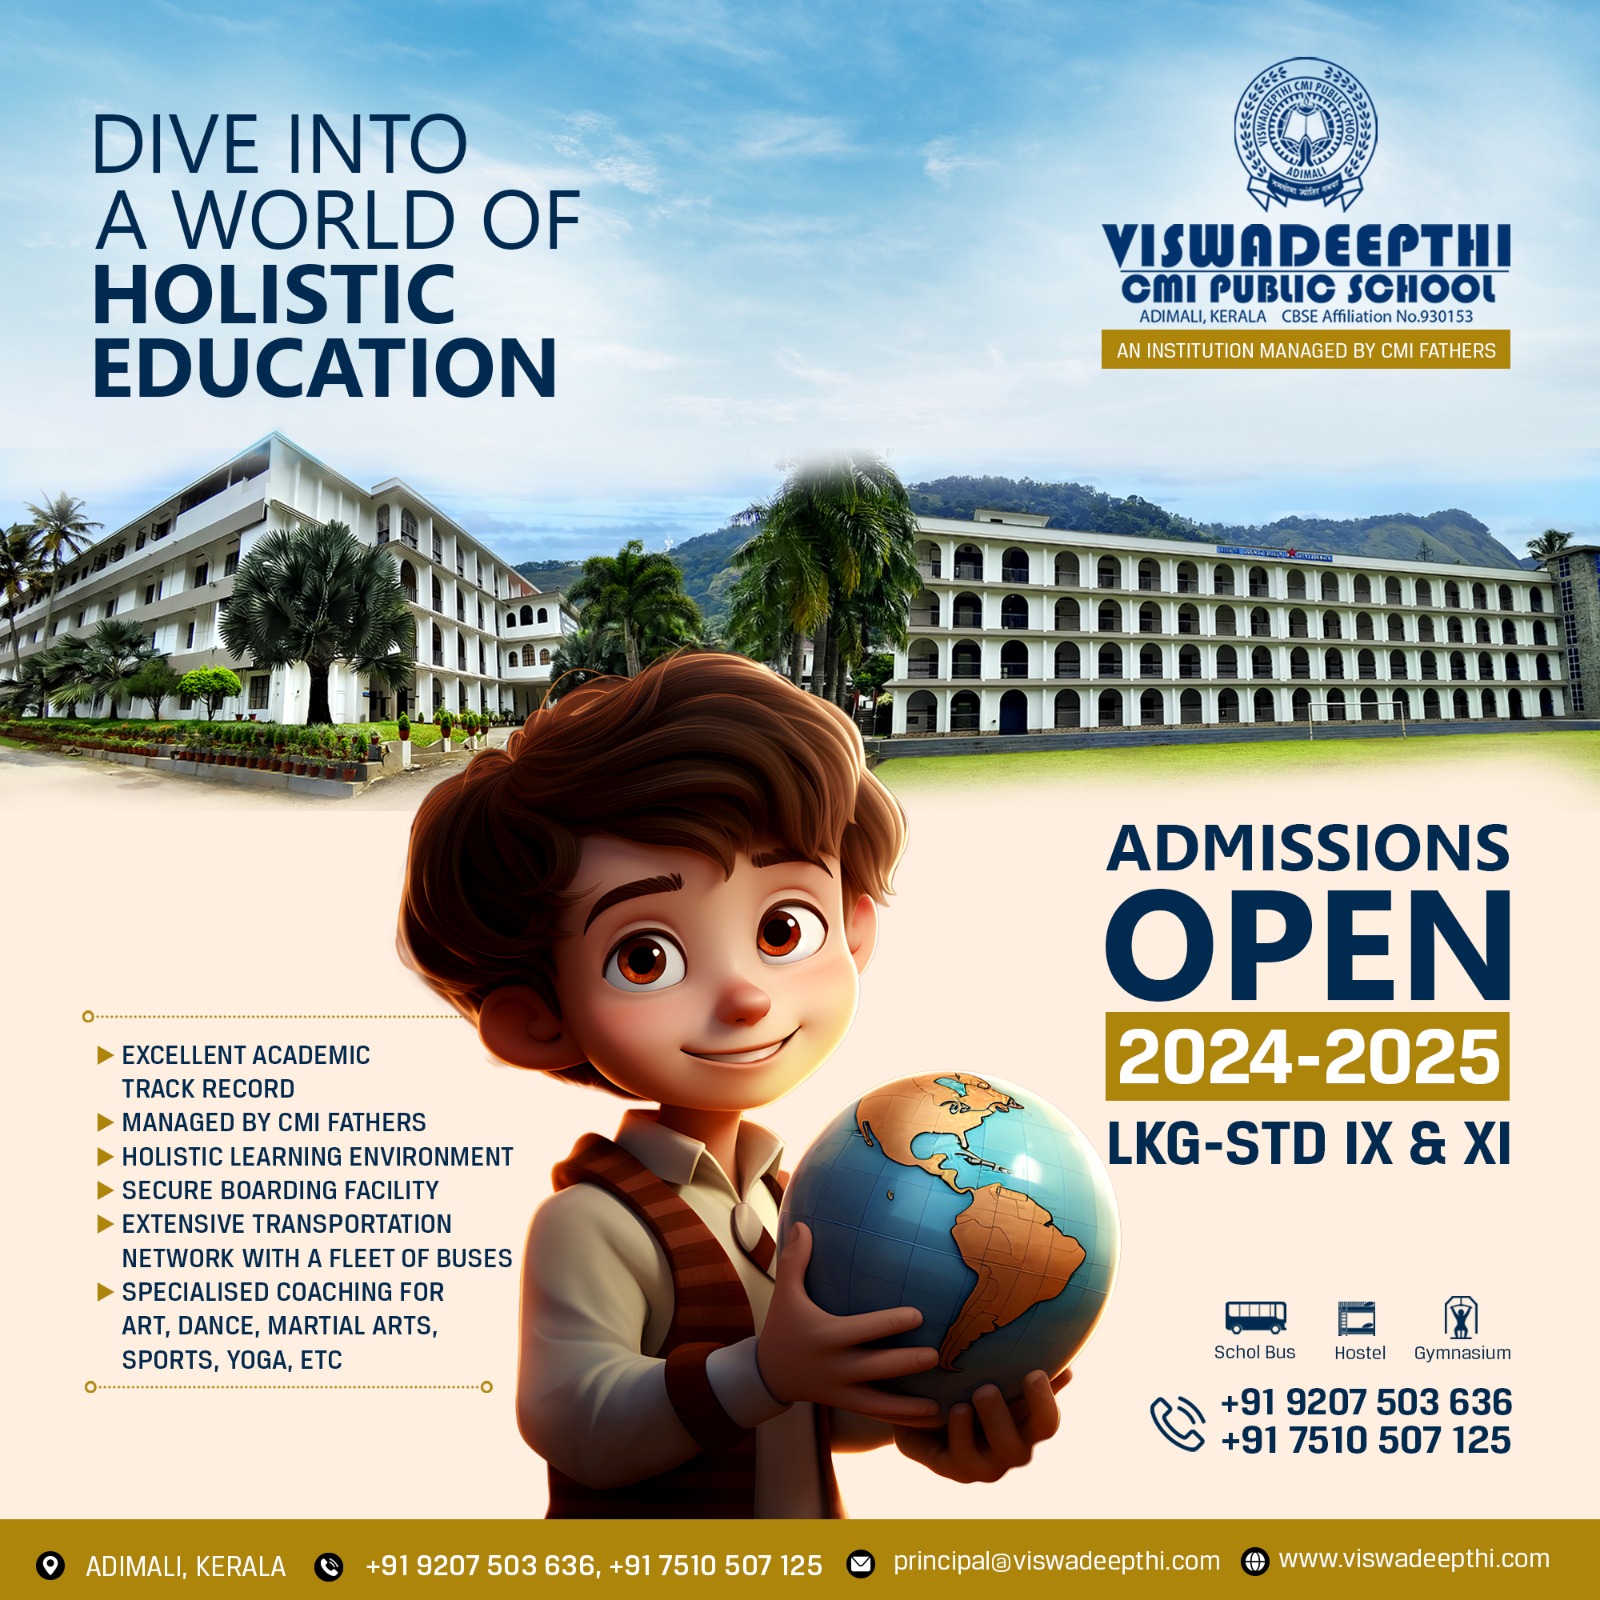 ADMISSION OPEN FOR 2024-2025